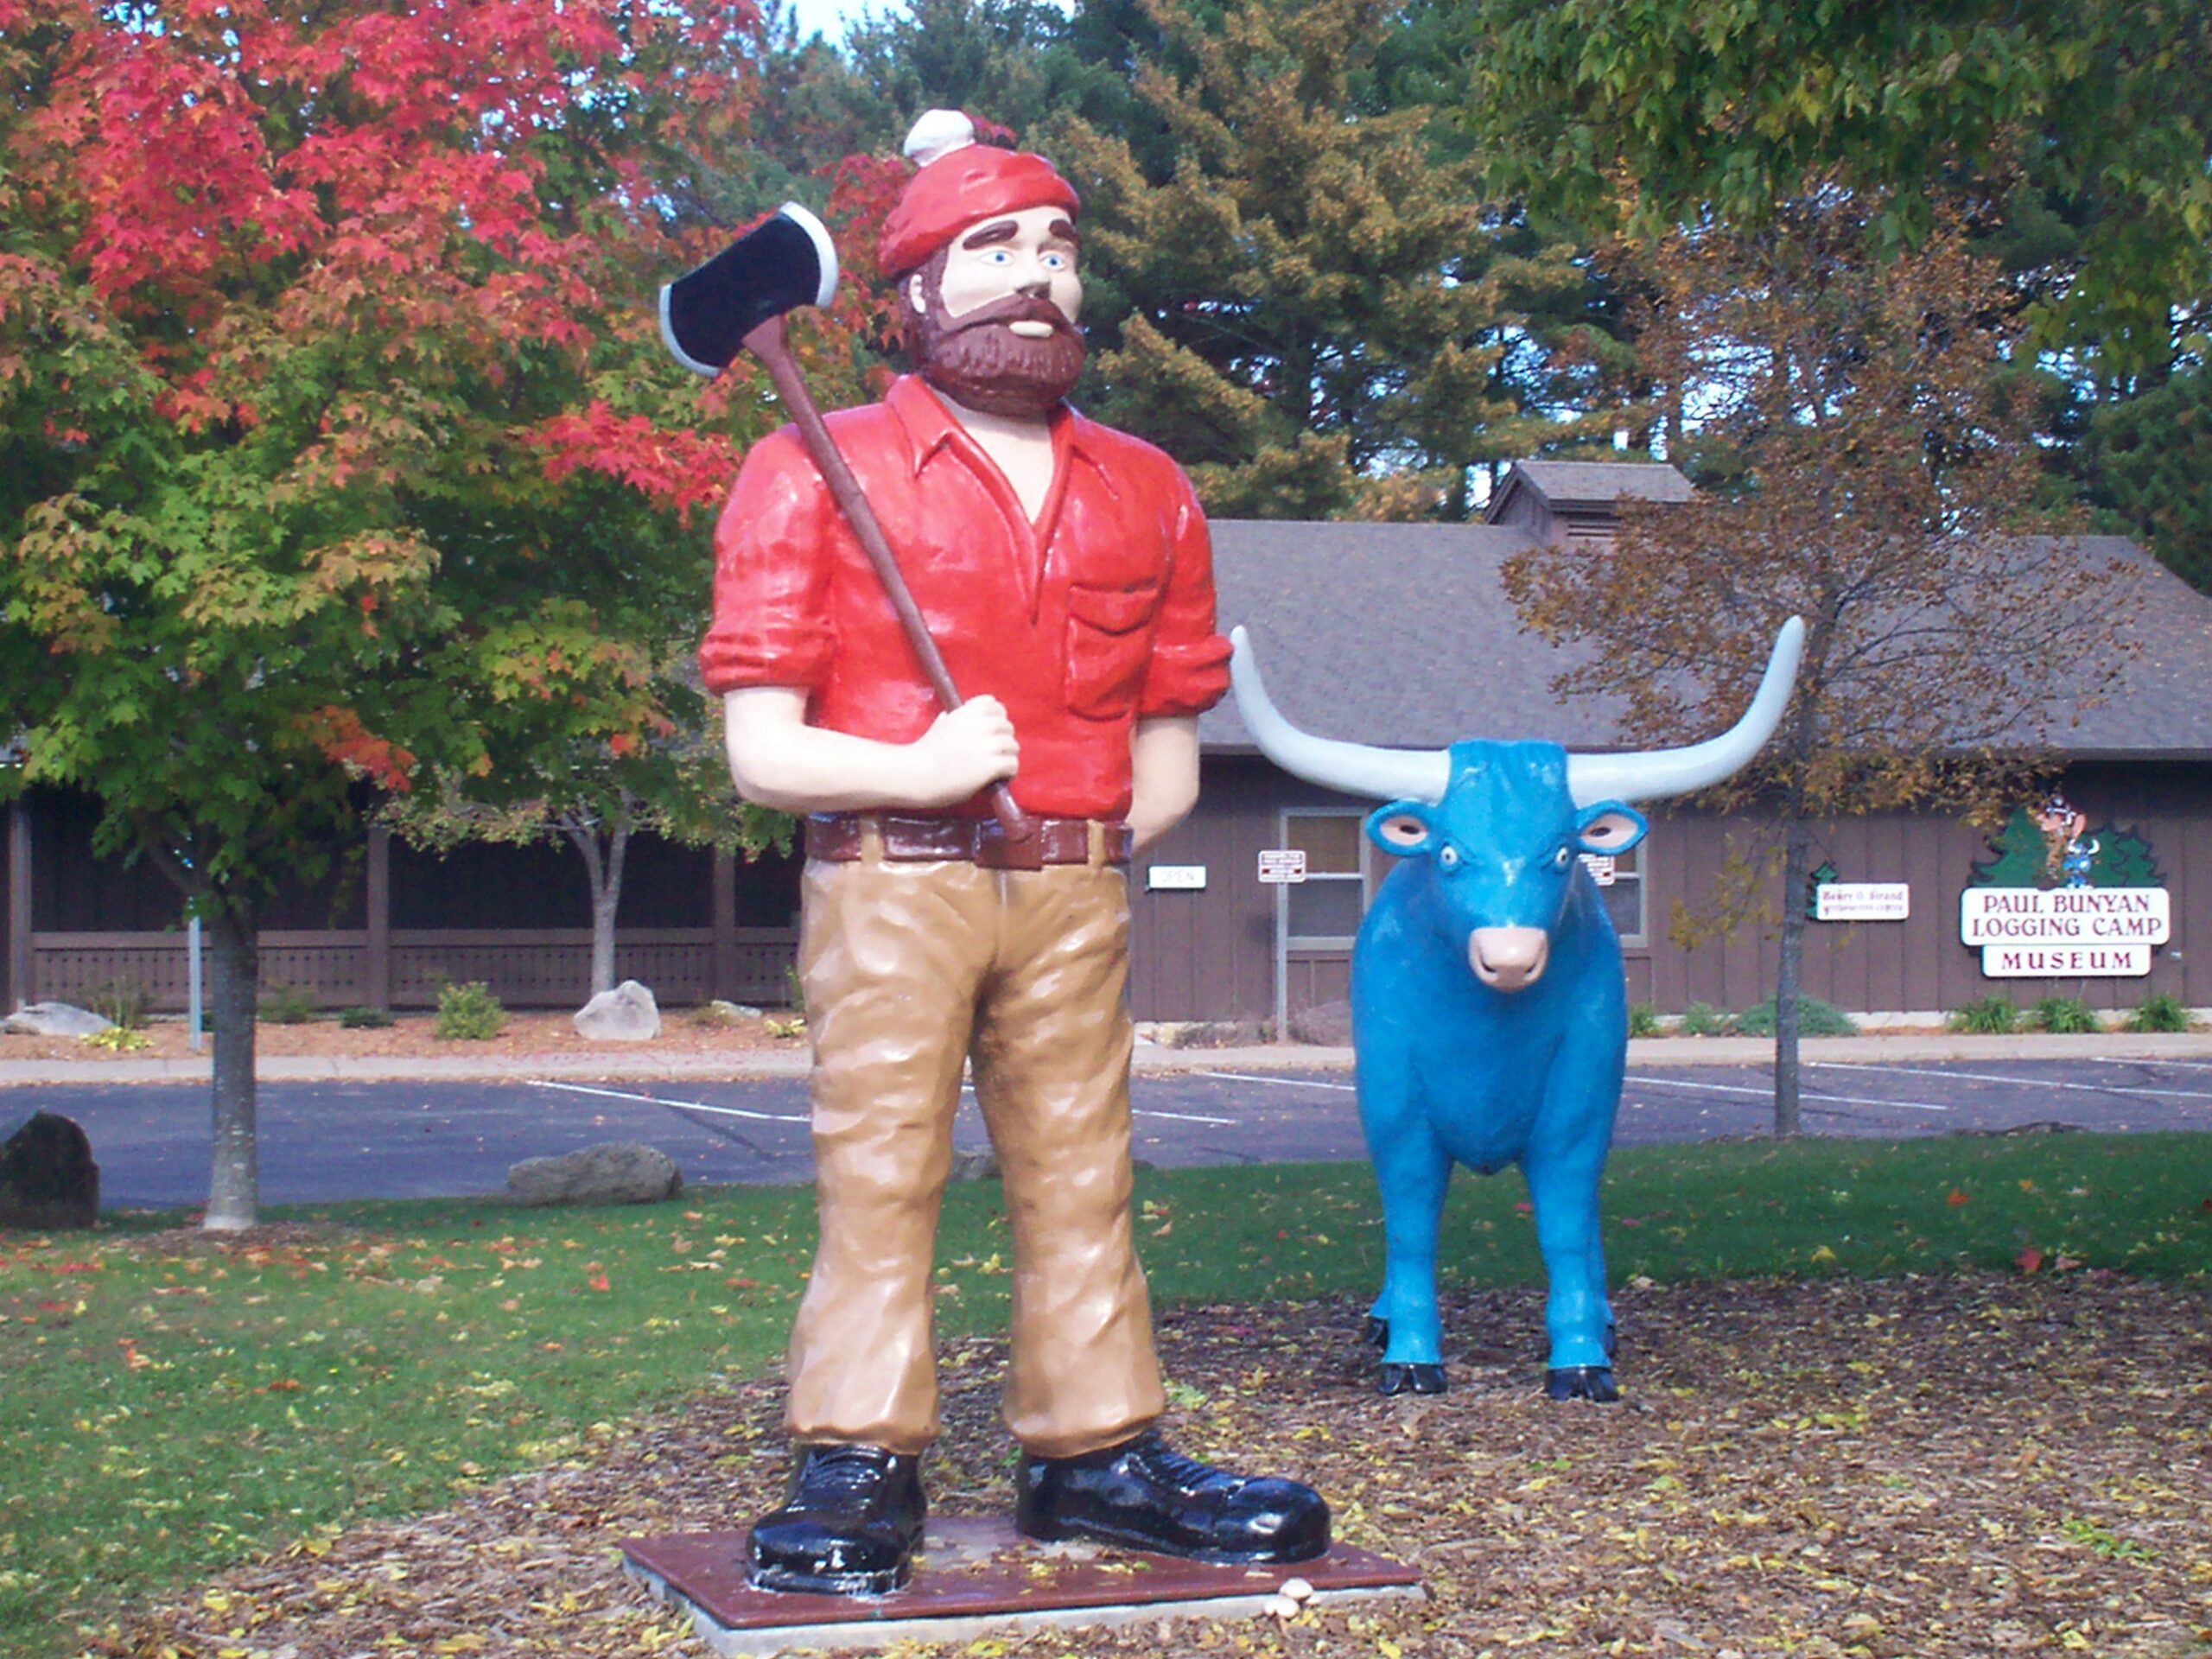 Statue of Paul Bunyan and his blue ox